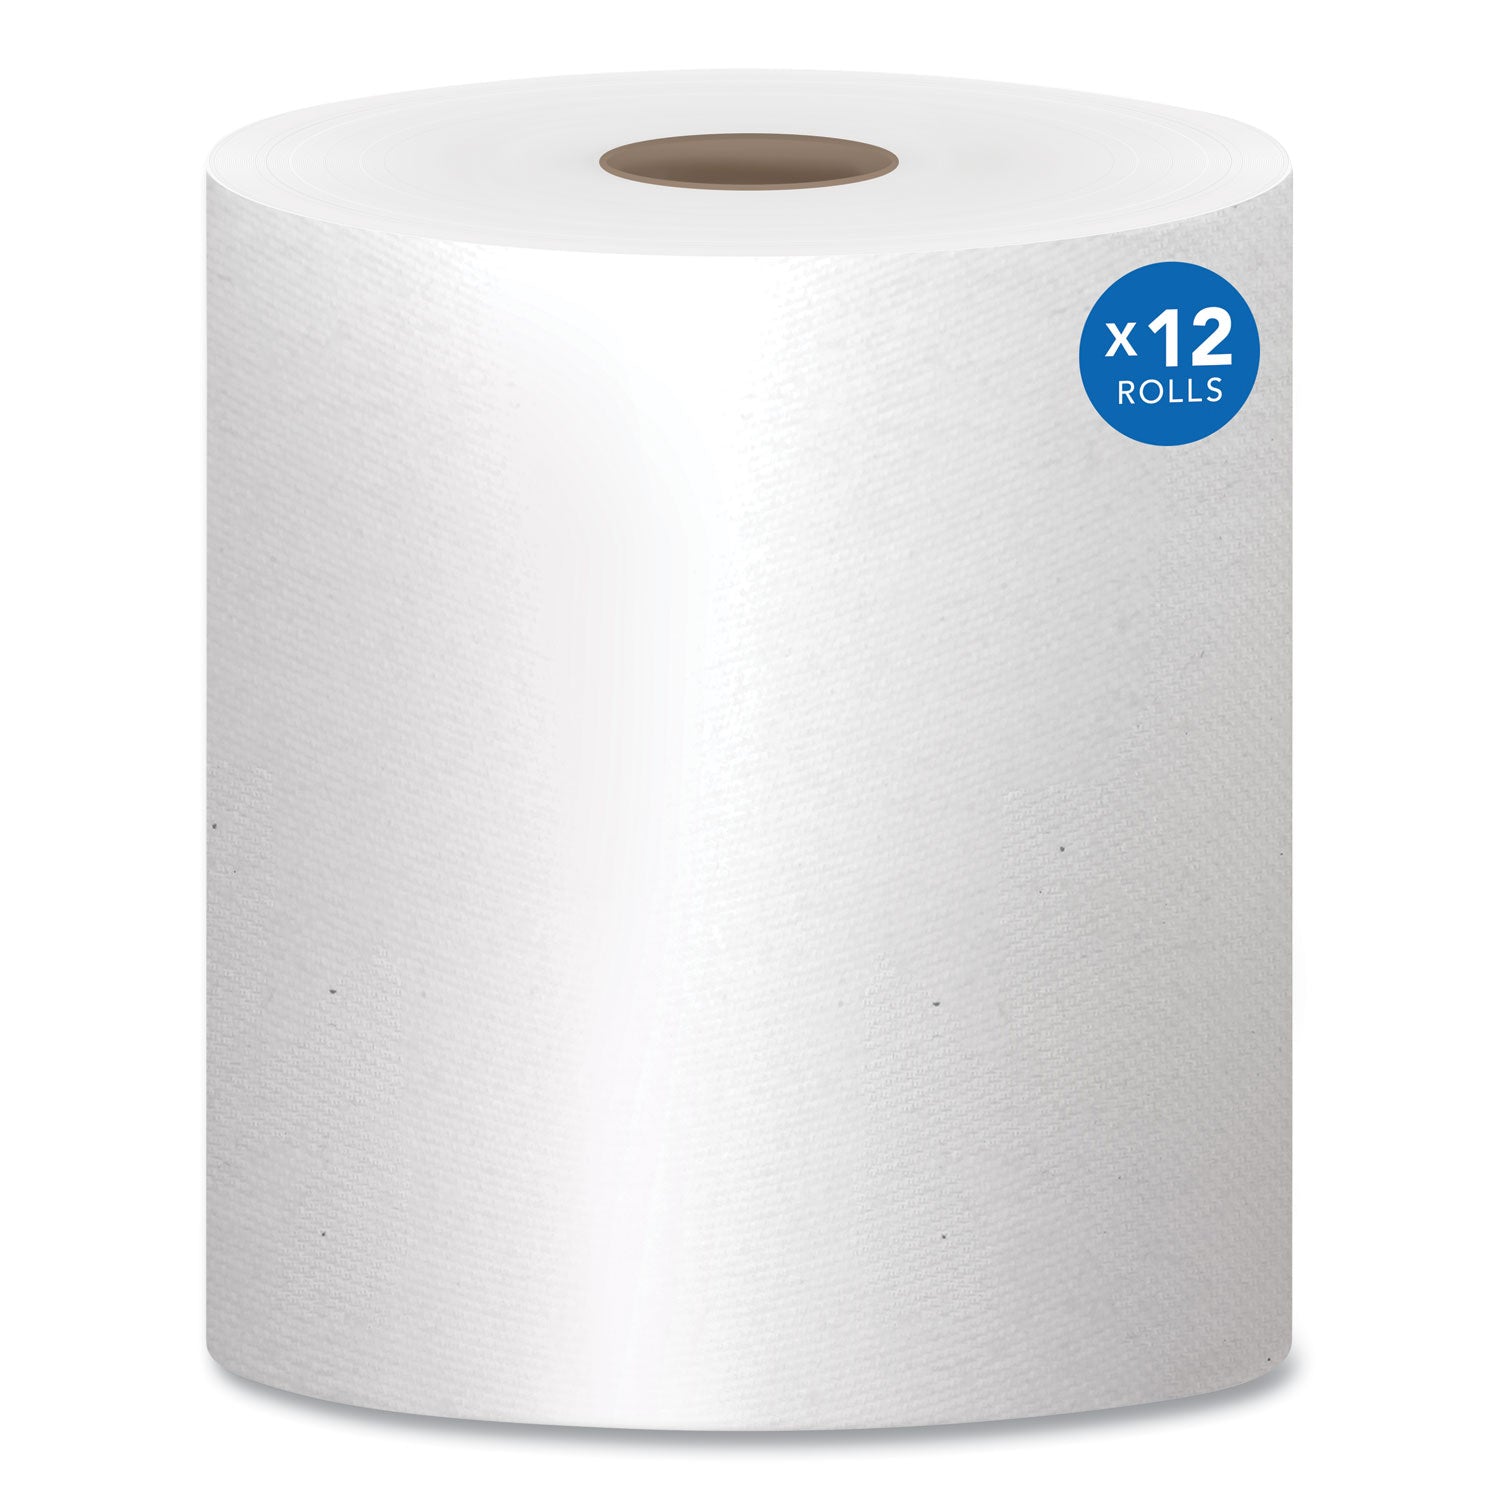 Essential 100% Recycled Fiber Hard Roll Towel, 1-Ply, 8" x 800 ft, 1.5" Core, White, 12 Rolls/Carton - 